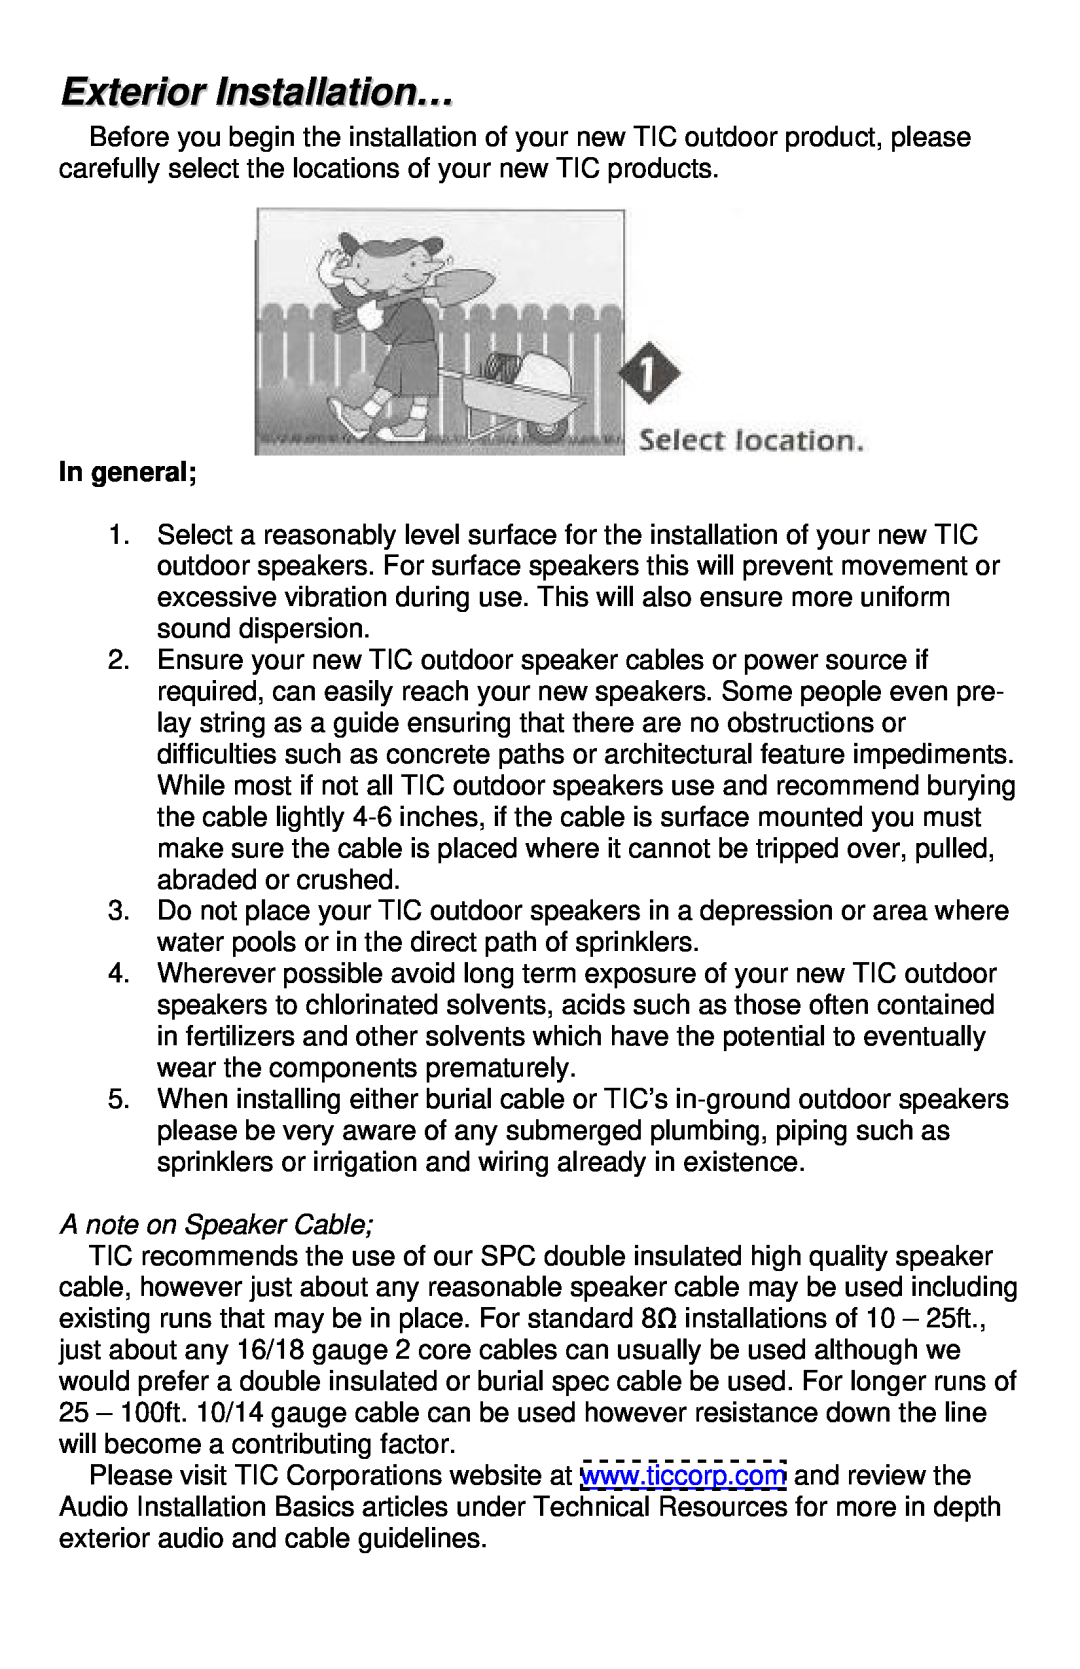 TIC TFS12 manual Exterior Installation…, In general 